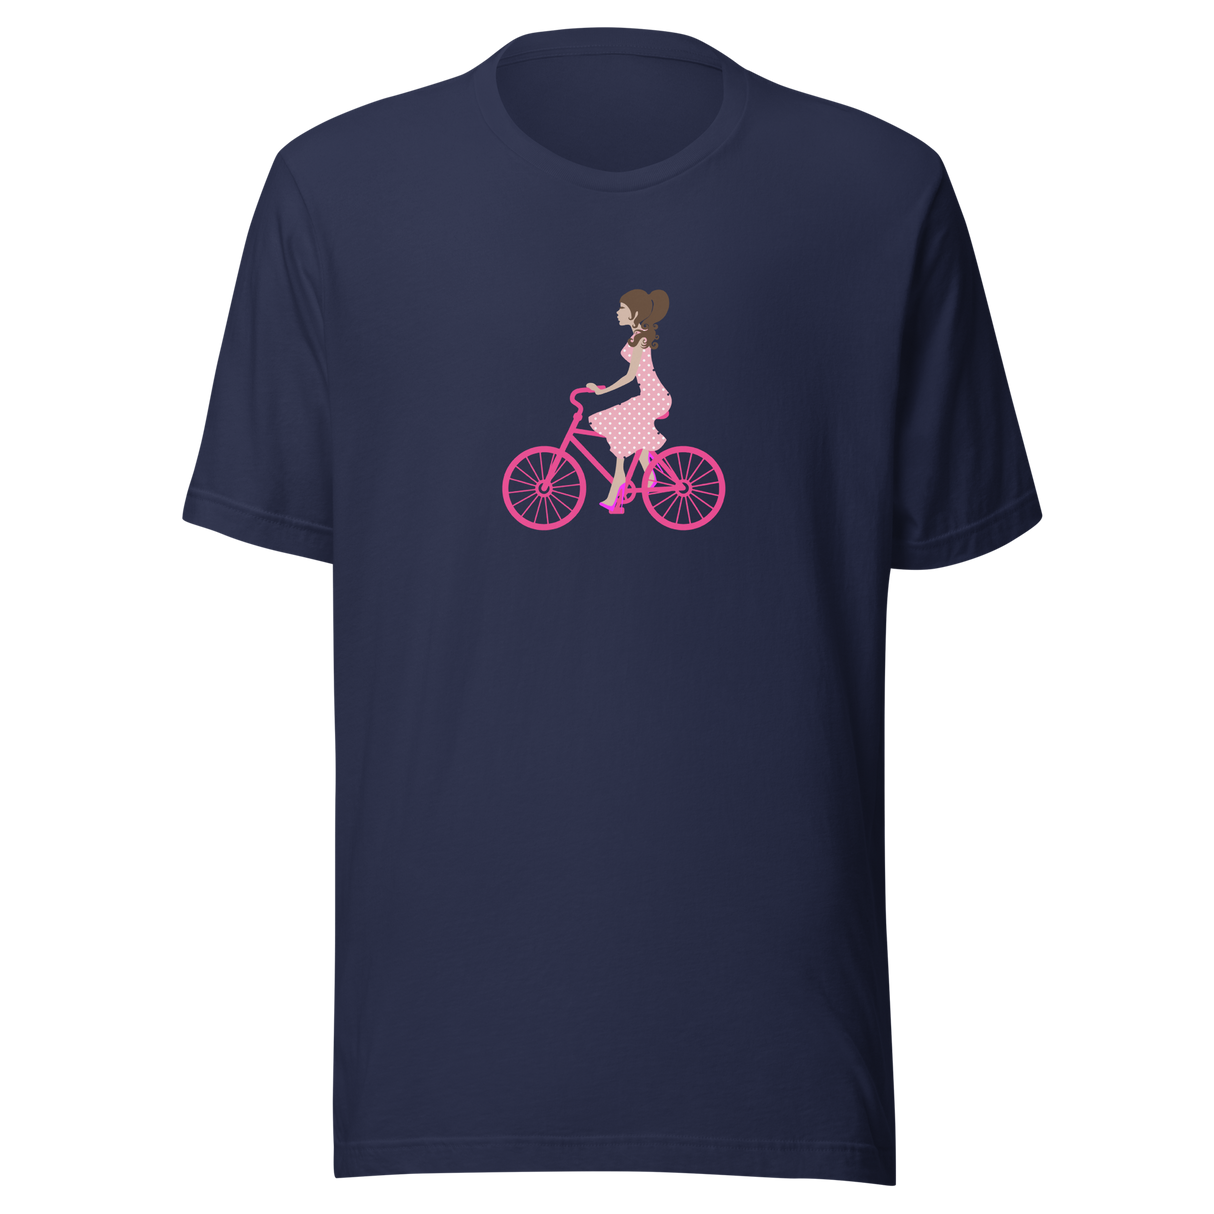 lady-in-pink-dress-riding-pink-bicycle-bicycle-tee-bike-t-shirt-lady-tee-gift-t-shirt-mom-tee#color_navy